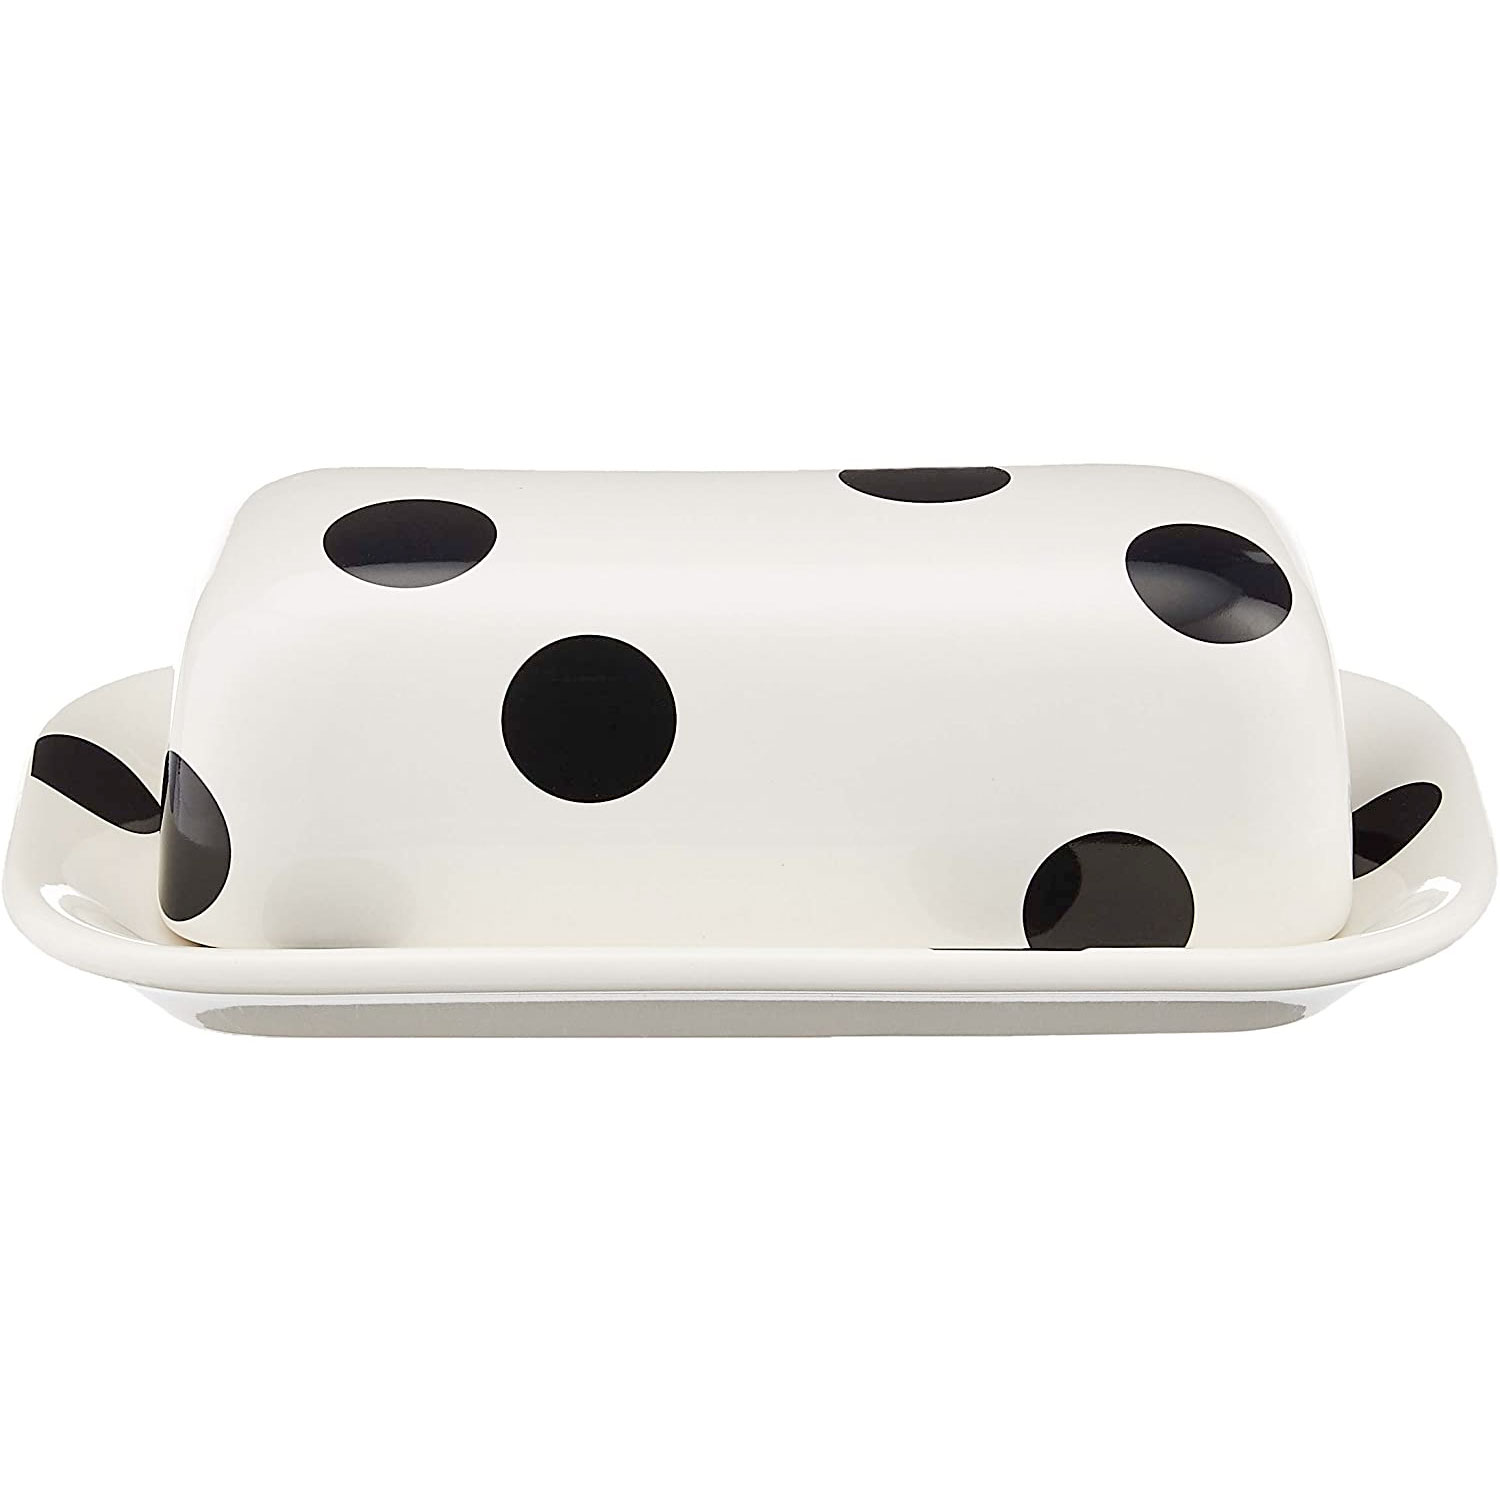 Amazon：Kate Spade Deco Dot Covered Butter Dish只賣$8.96